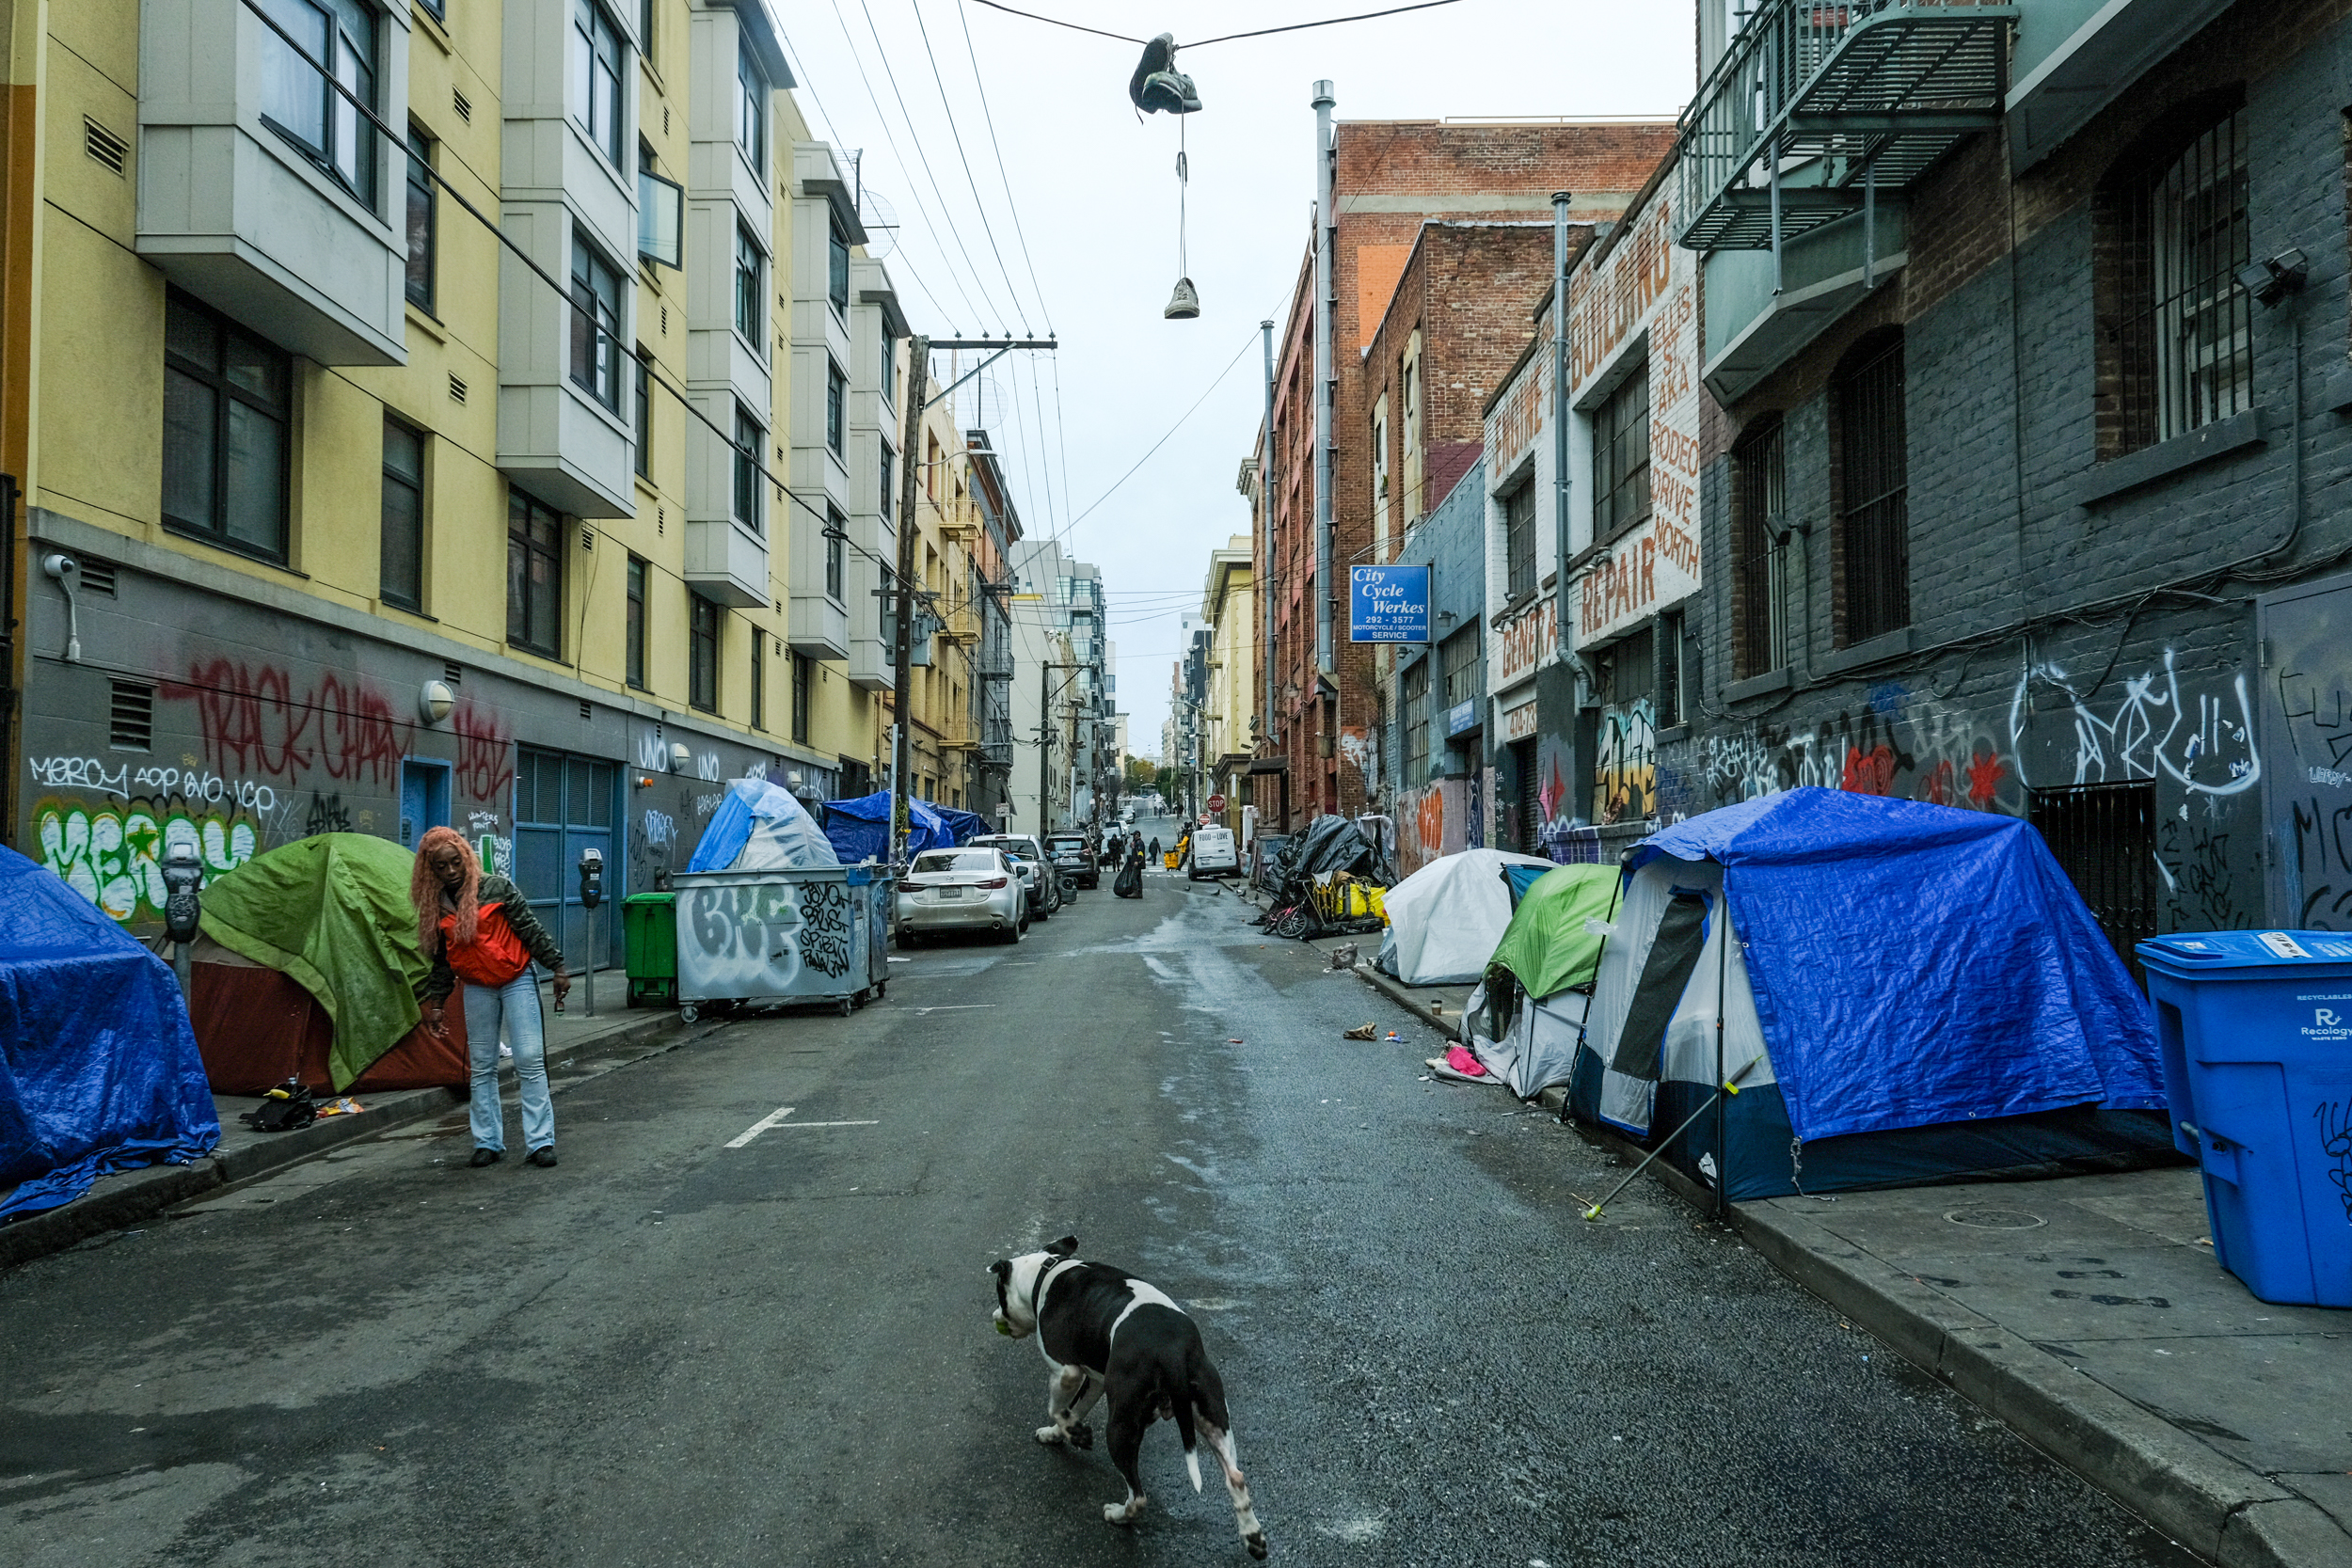 A dog walks down a street lined with tents